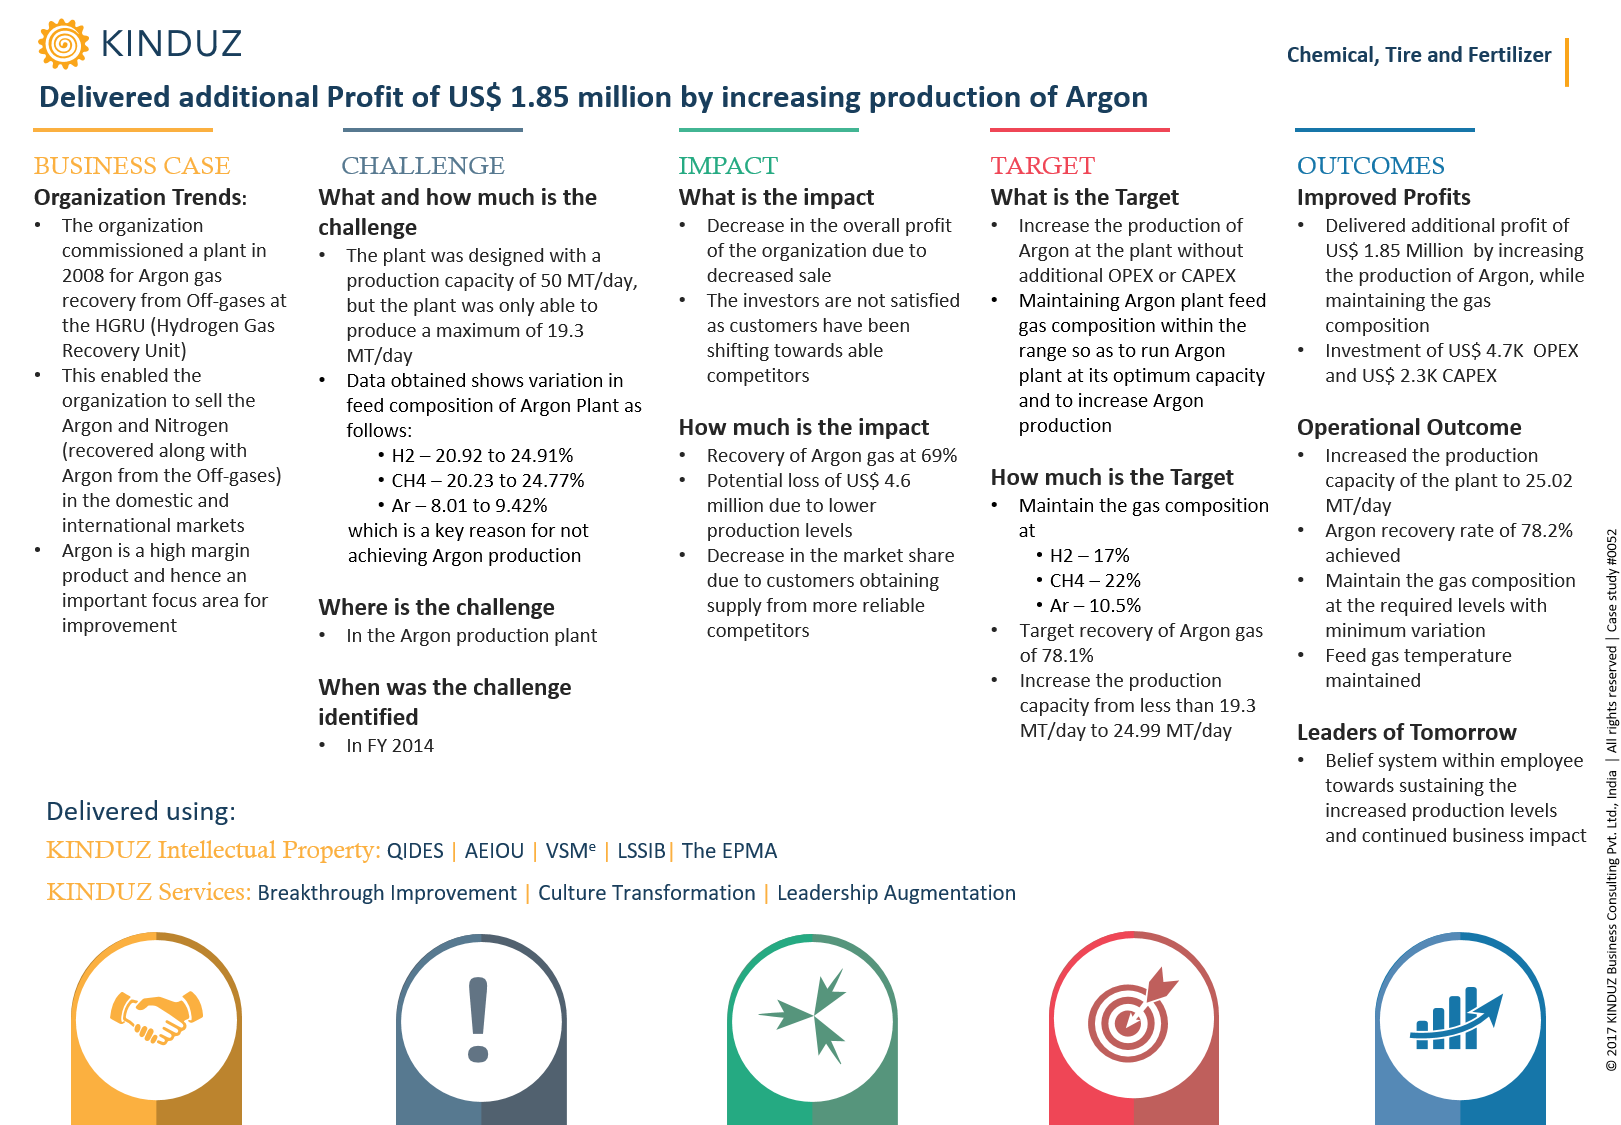 delivered-additional-profit-of-us-1.85-million-by-increasing-production-of-argon